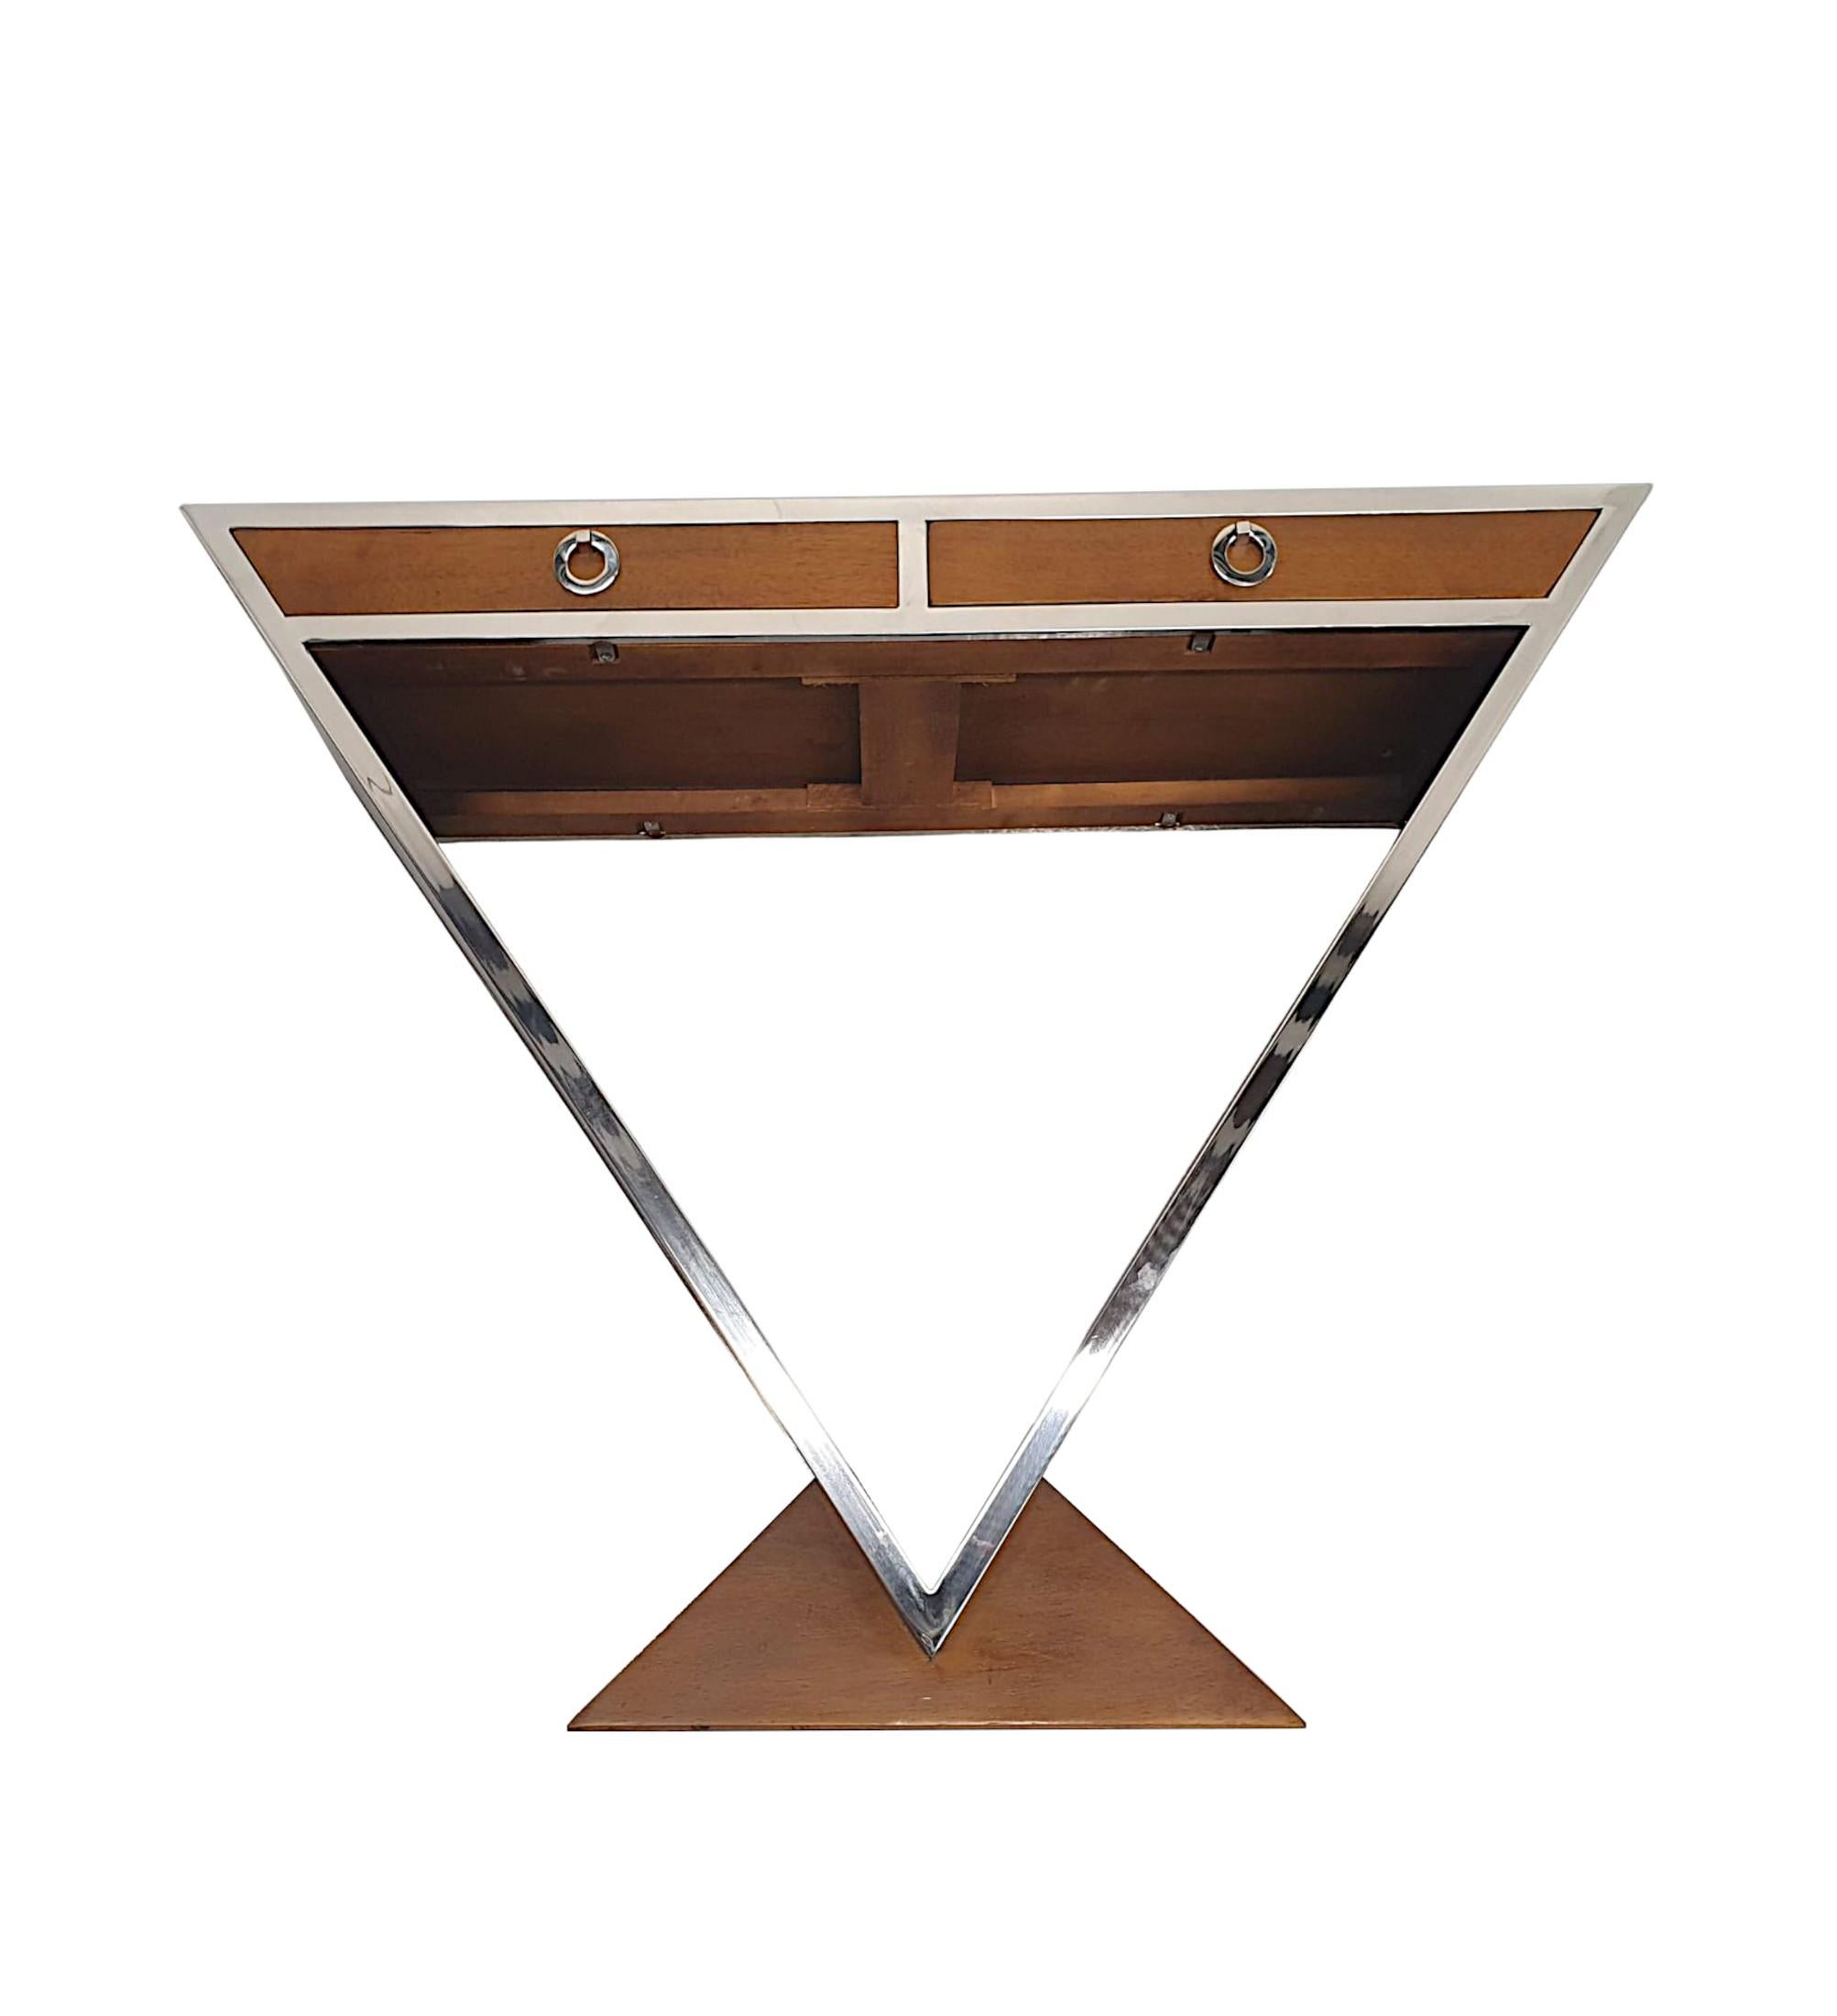 A Fabulous Art Deco Design Cherrywood and Chrome Console or Side Table For Sale 2